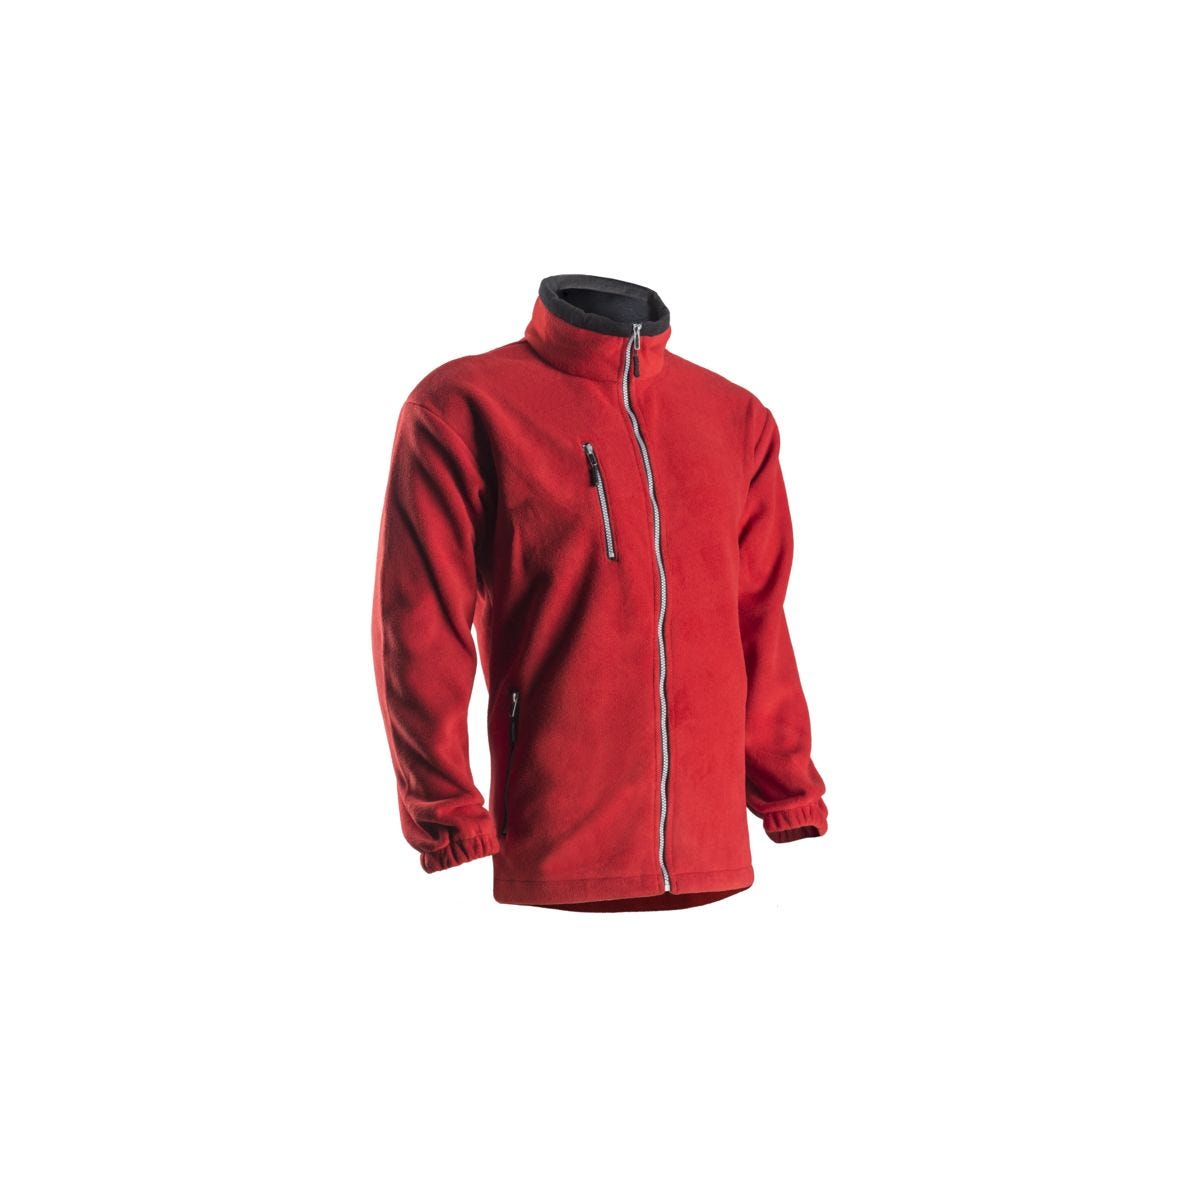 Veste polaire Angara rouge - Coverguard - Taille M 0